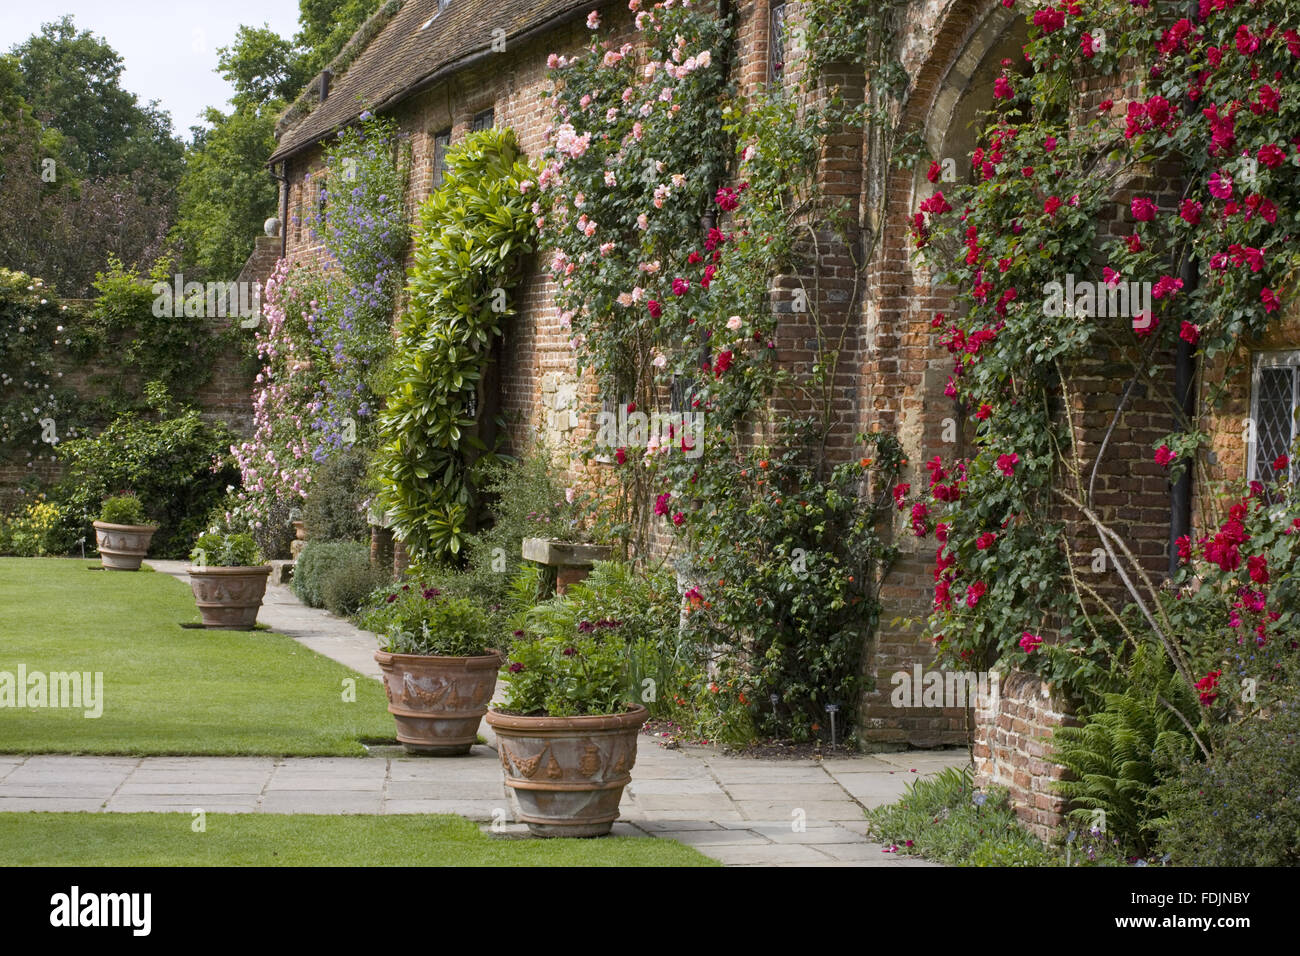 The front range and oldest part of the building, c.1490, seen here on the inner side of the Front Courtyard at Sissinghurst Castle Garden, near Cranbrook, Kent. The red rose 'Allen Chandler' climbs around the archway. Stock Photo